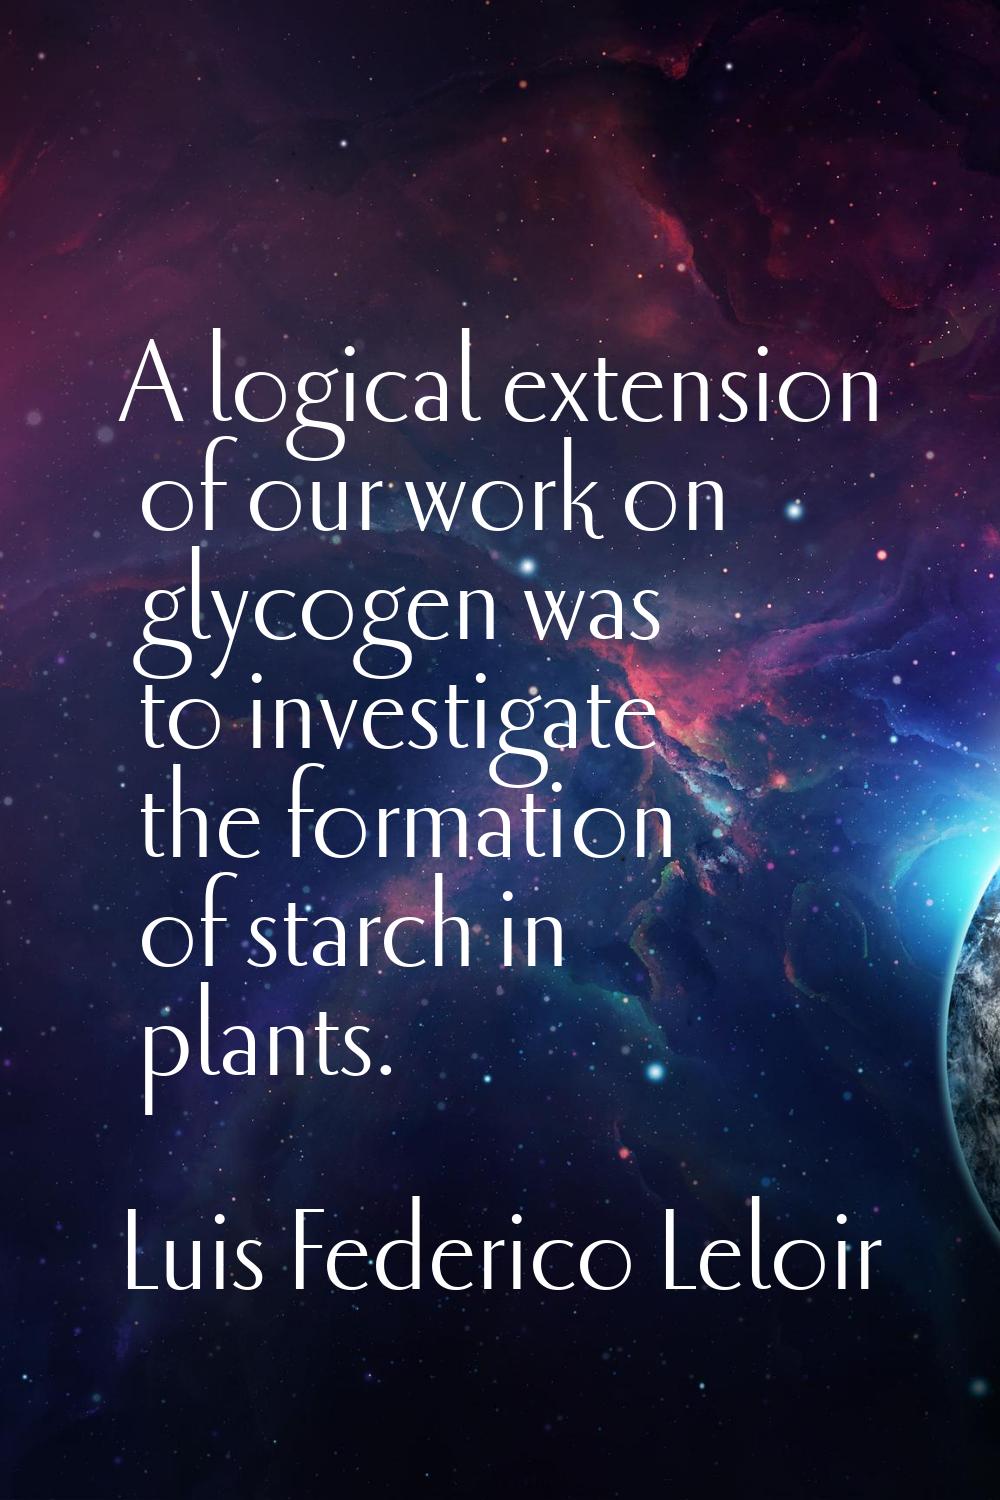 A logical extension of our work on glycogen was to investigate the formation of starch in plants.